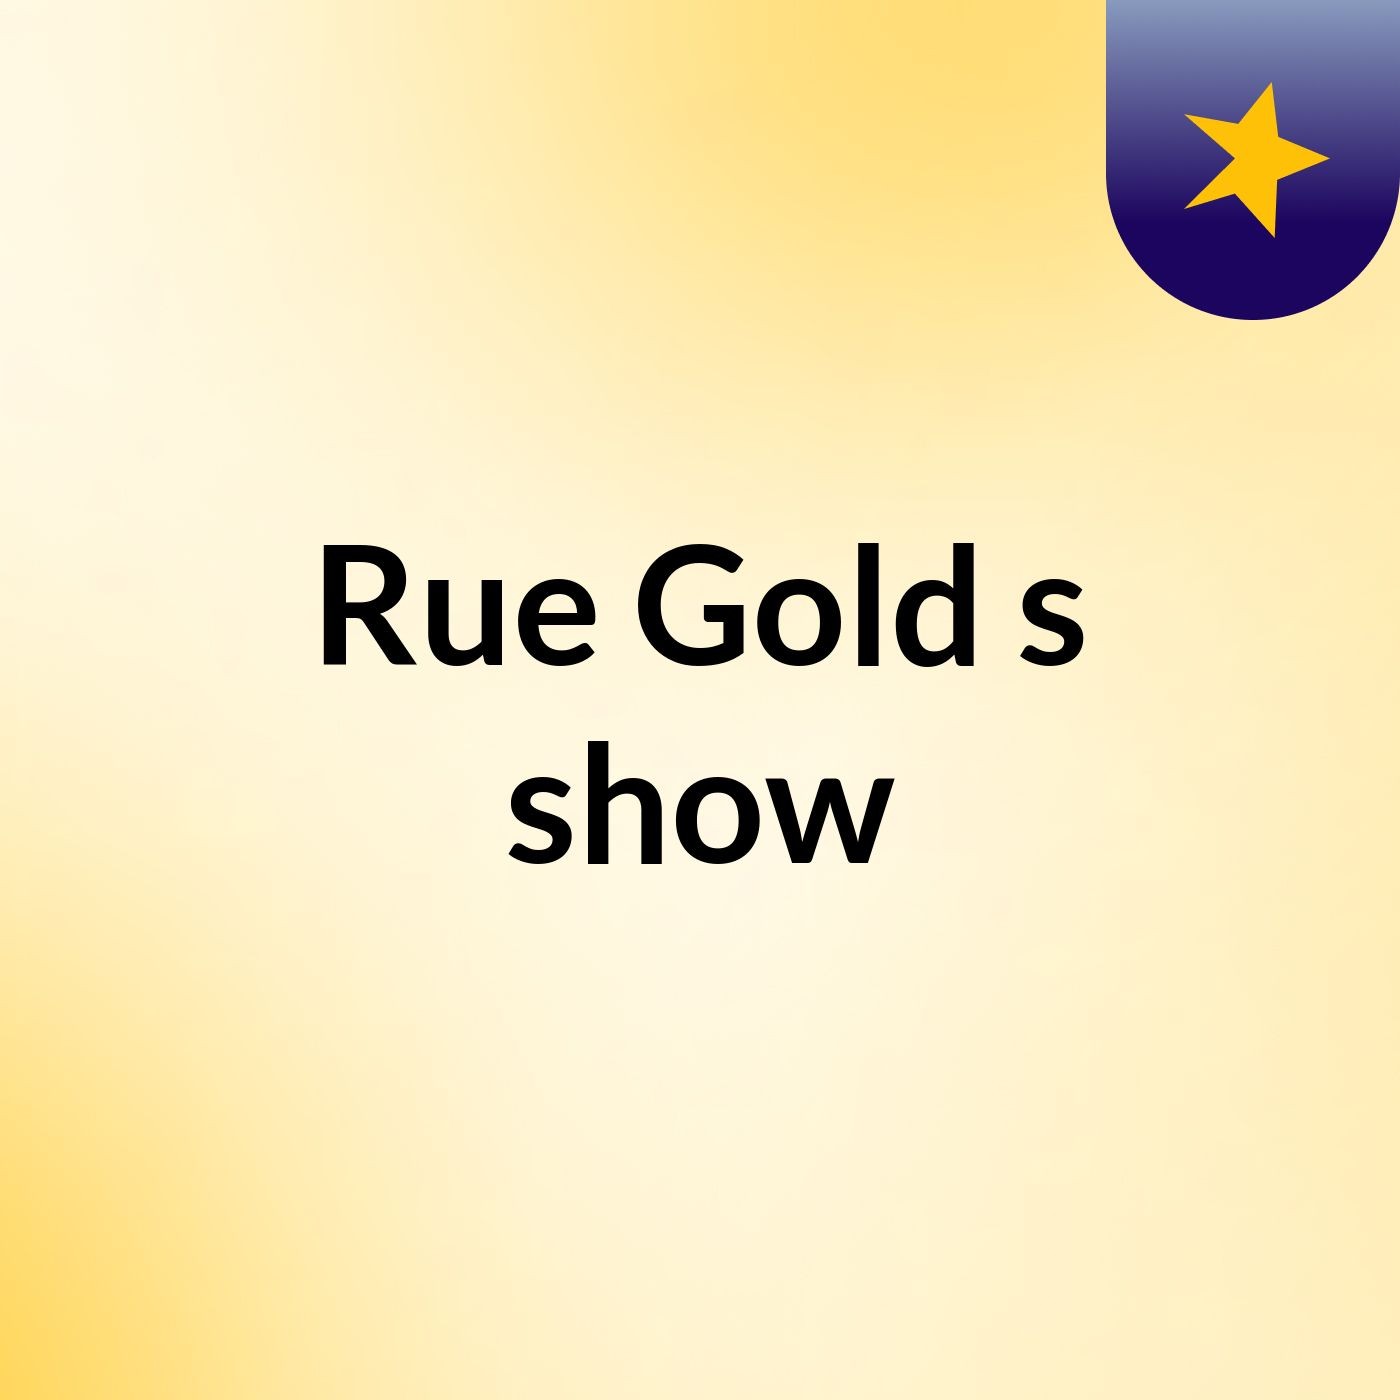 Rue Gold's show